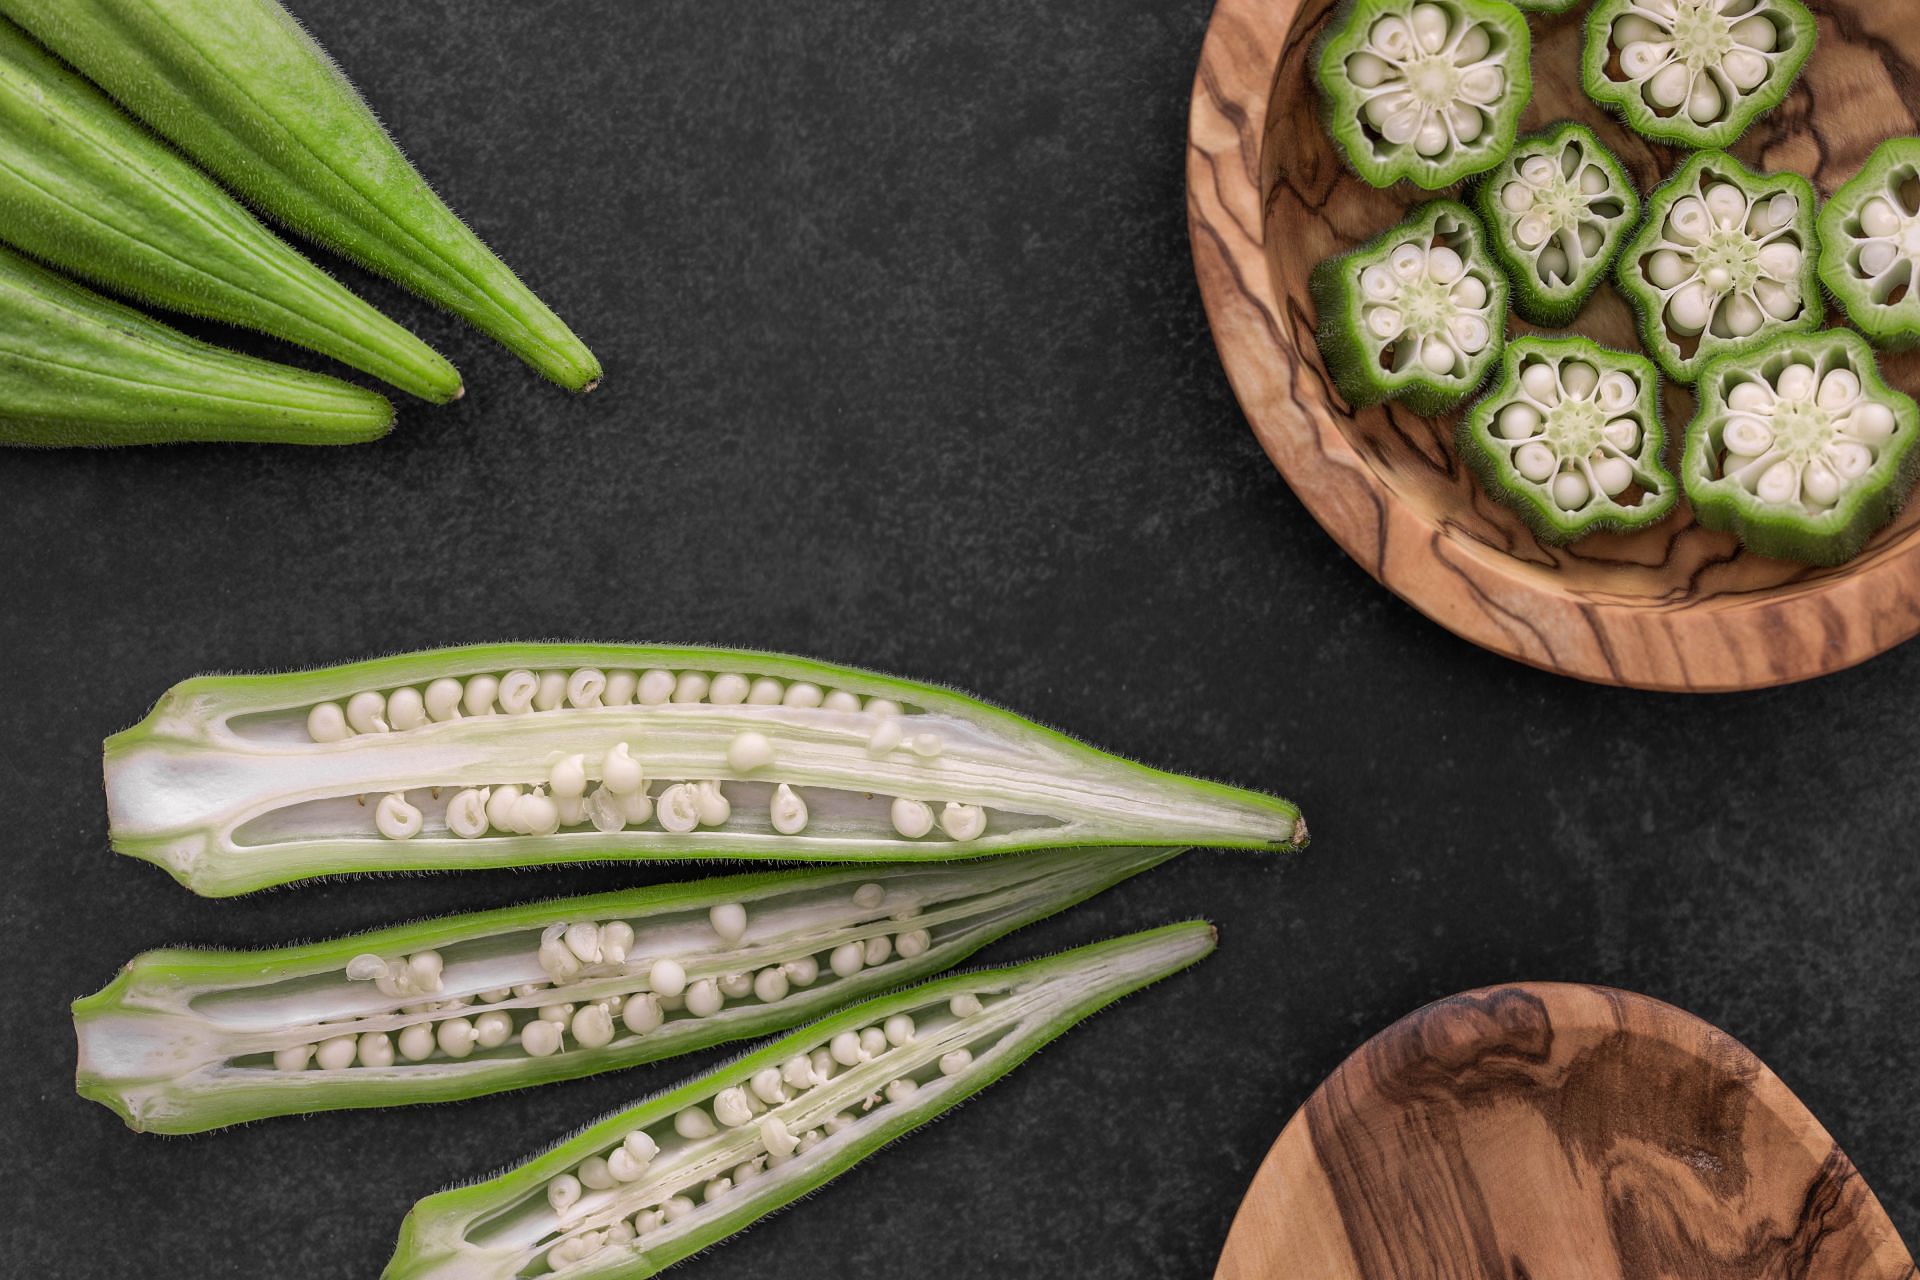 There are several benefits of okra as it is packed with nutrients. (Image via Pexels/ Victoria Bowers)